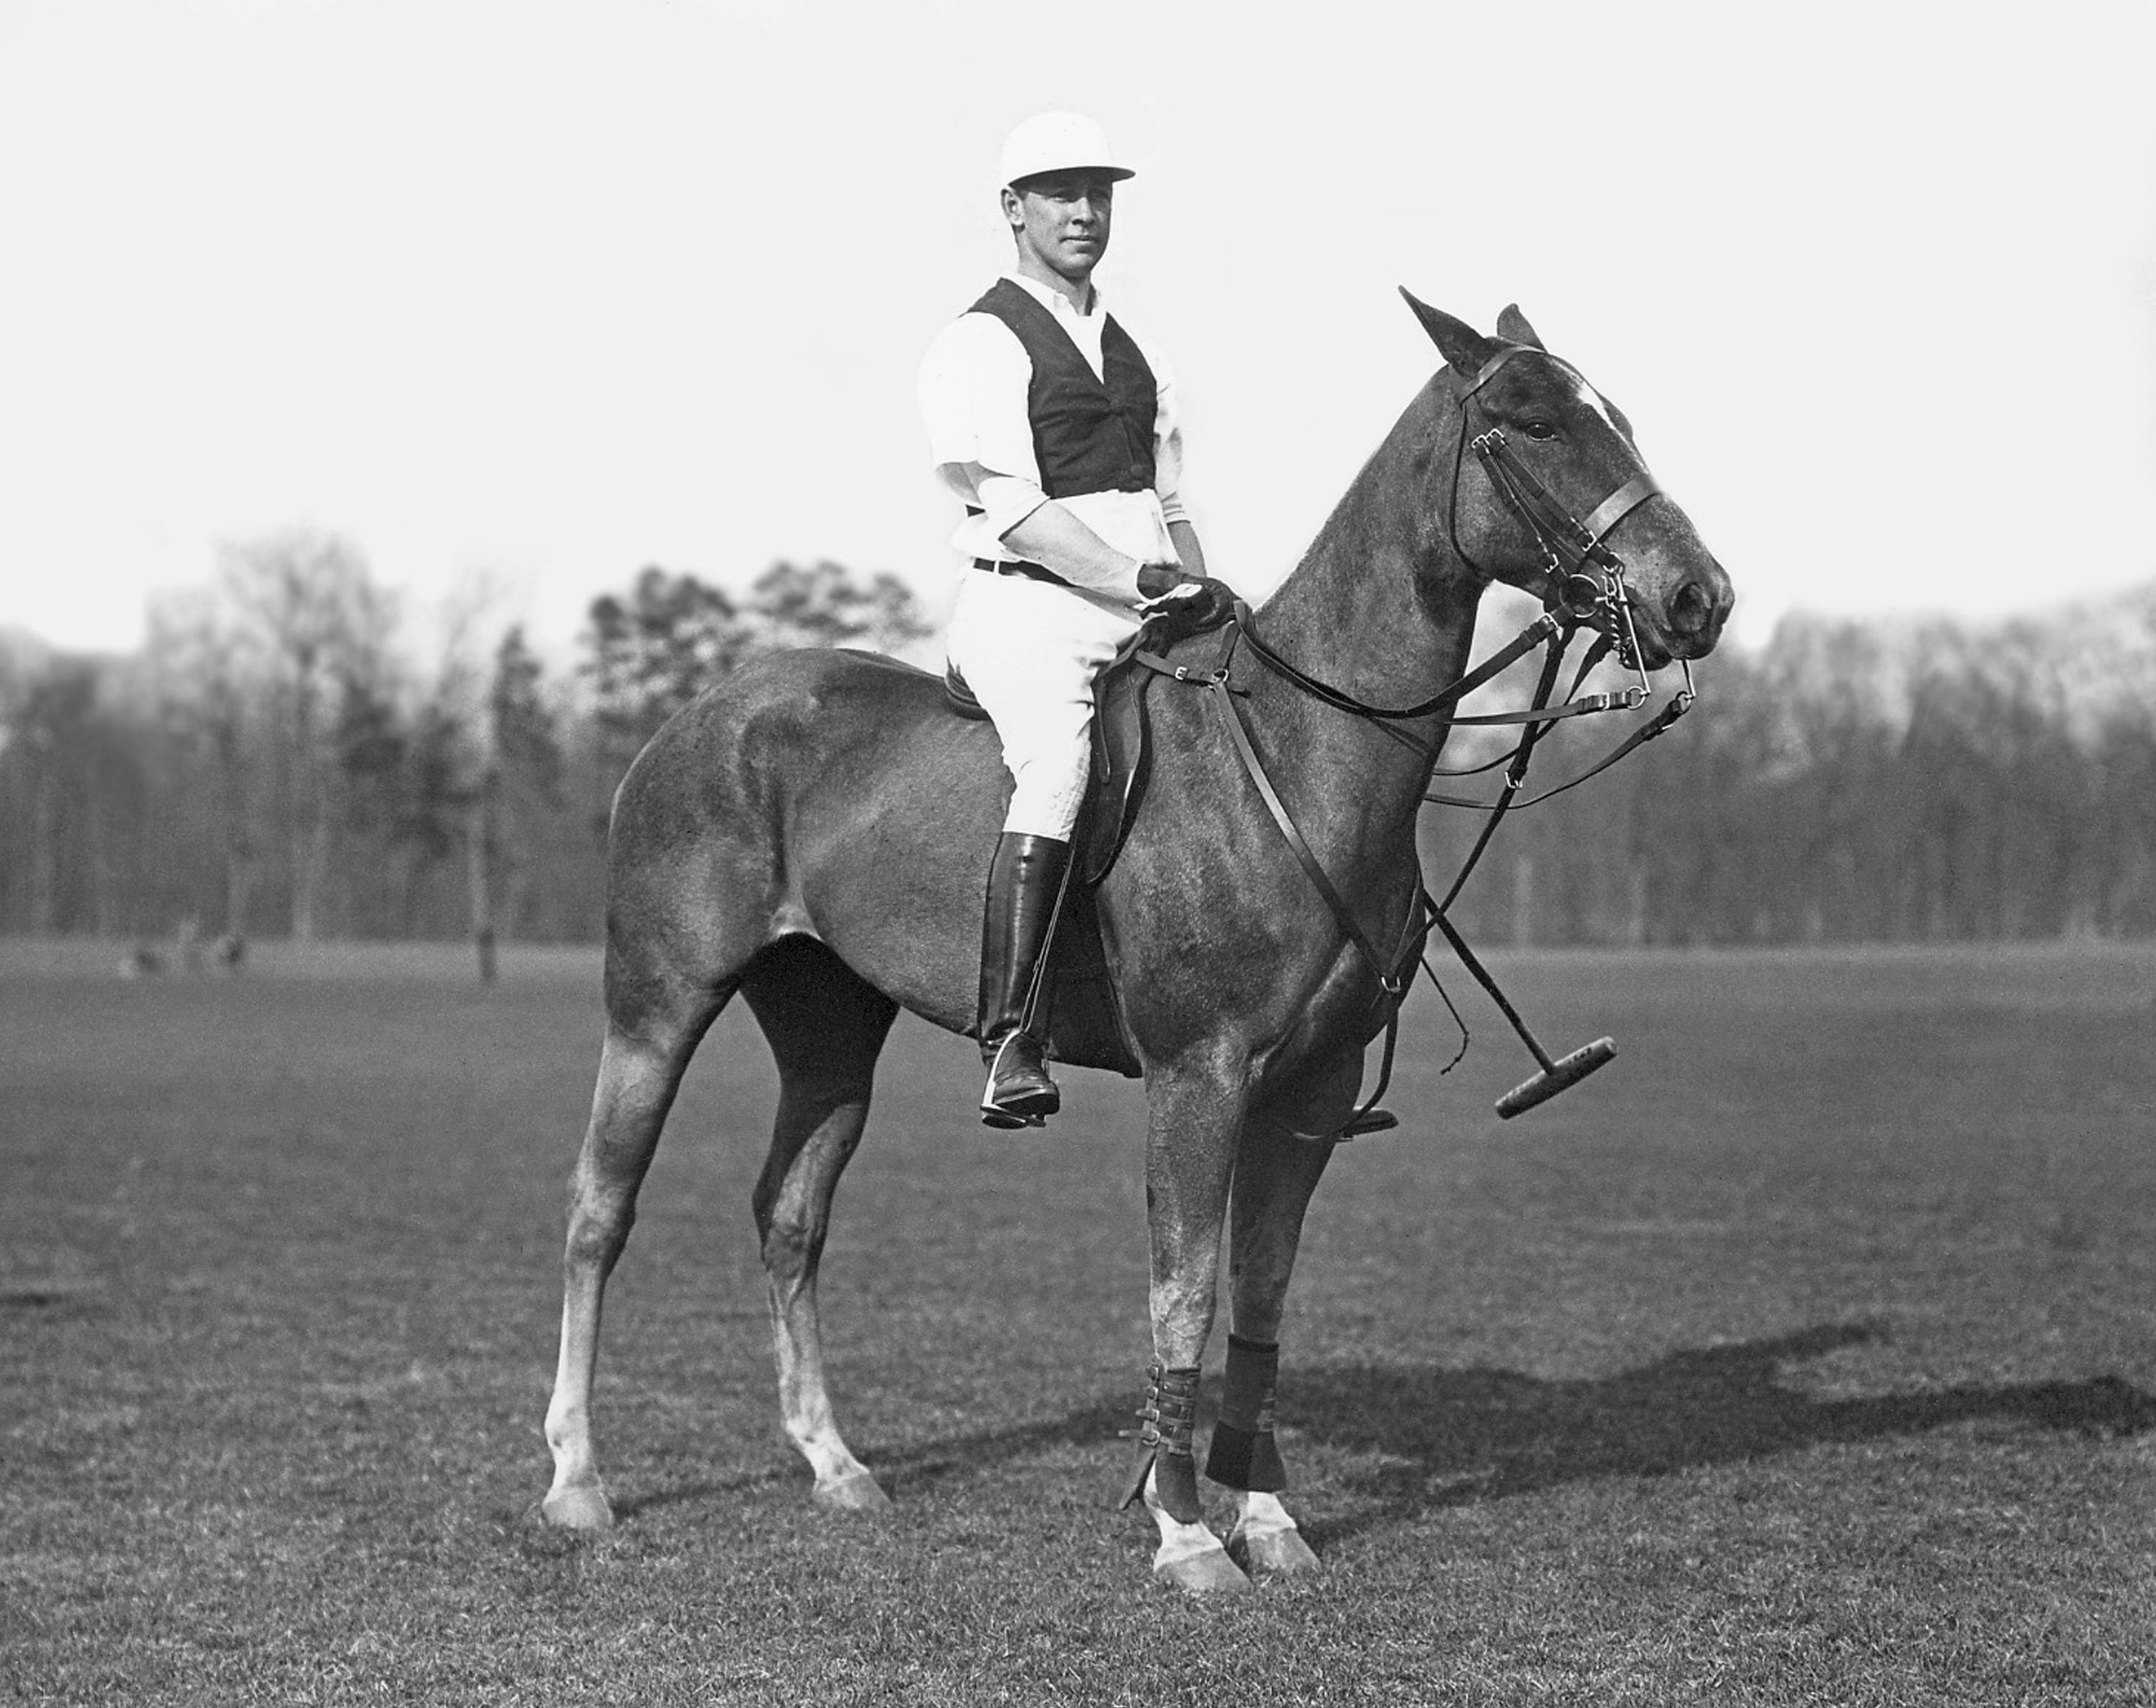 Harry Payne Whitney (Keeneland Library Cook Collection)